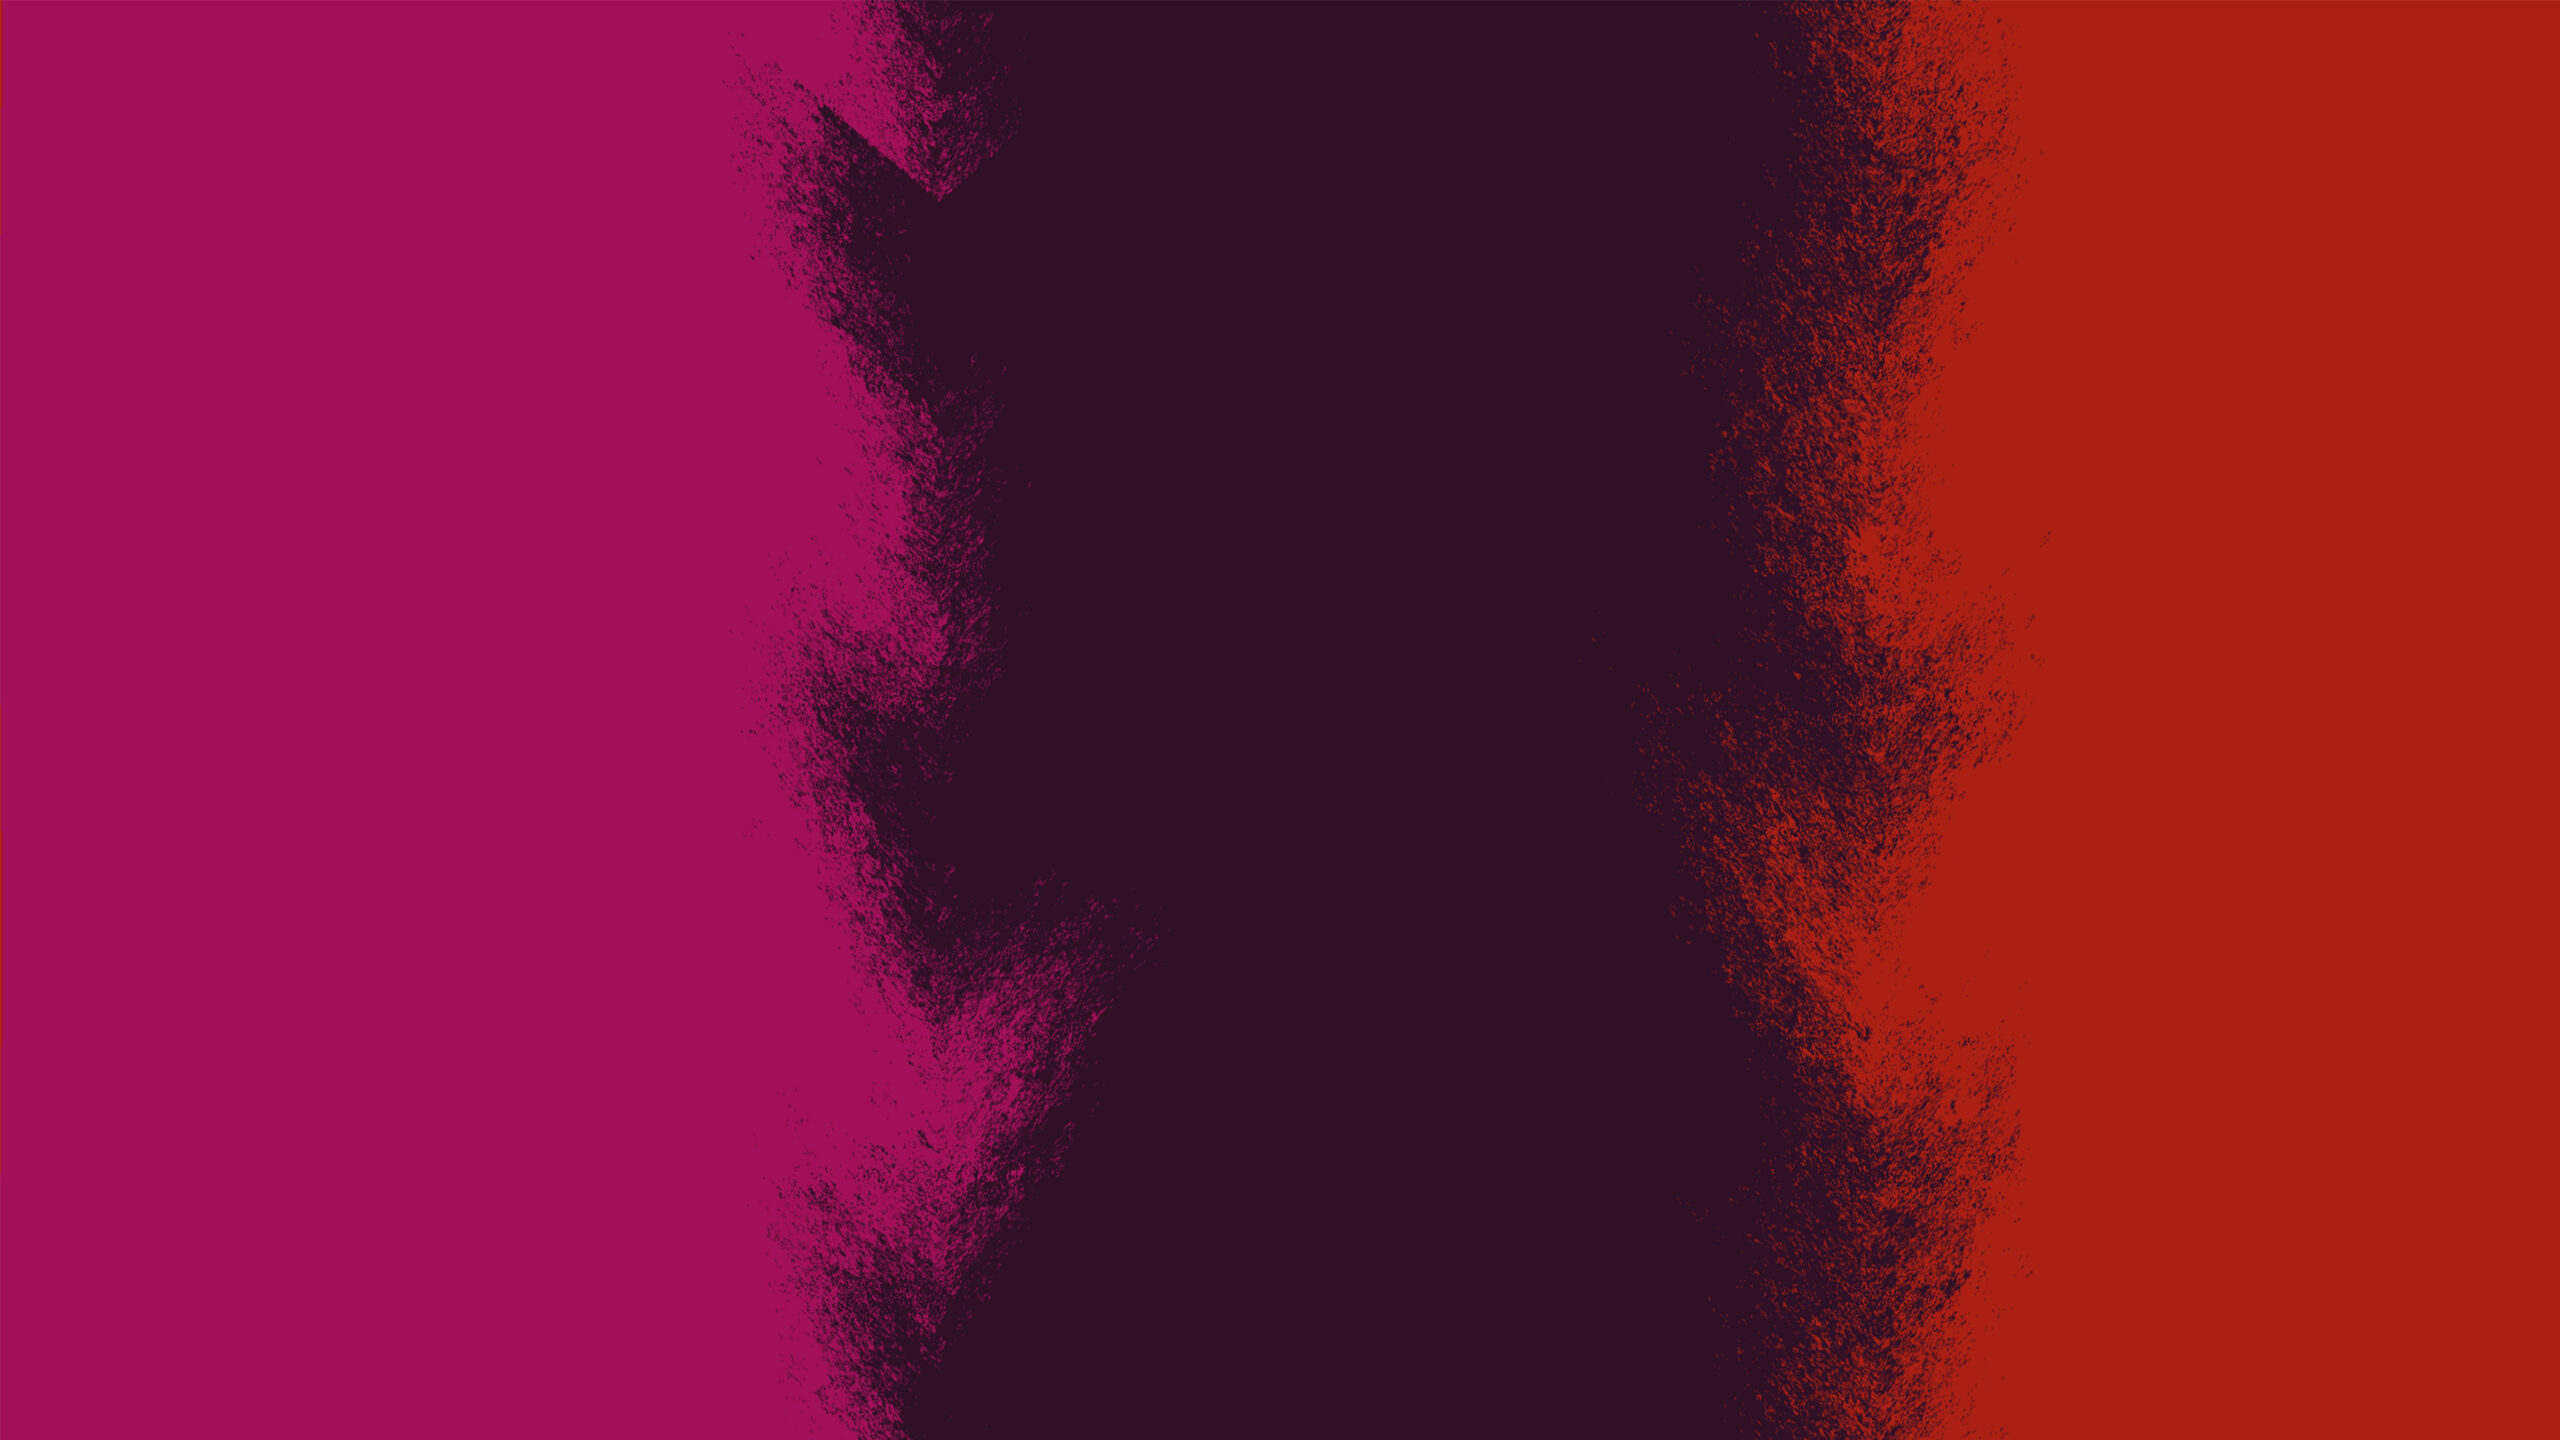 Dark pink, purple and red blocks of colour